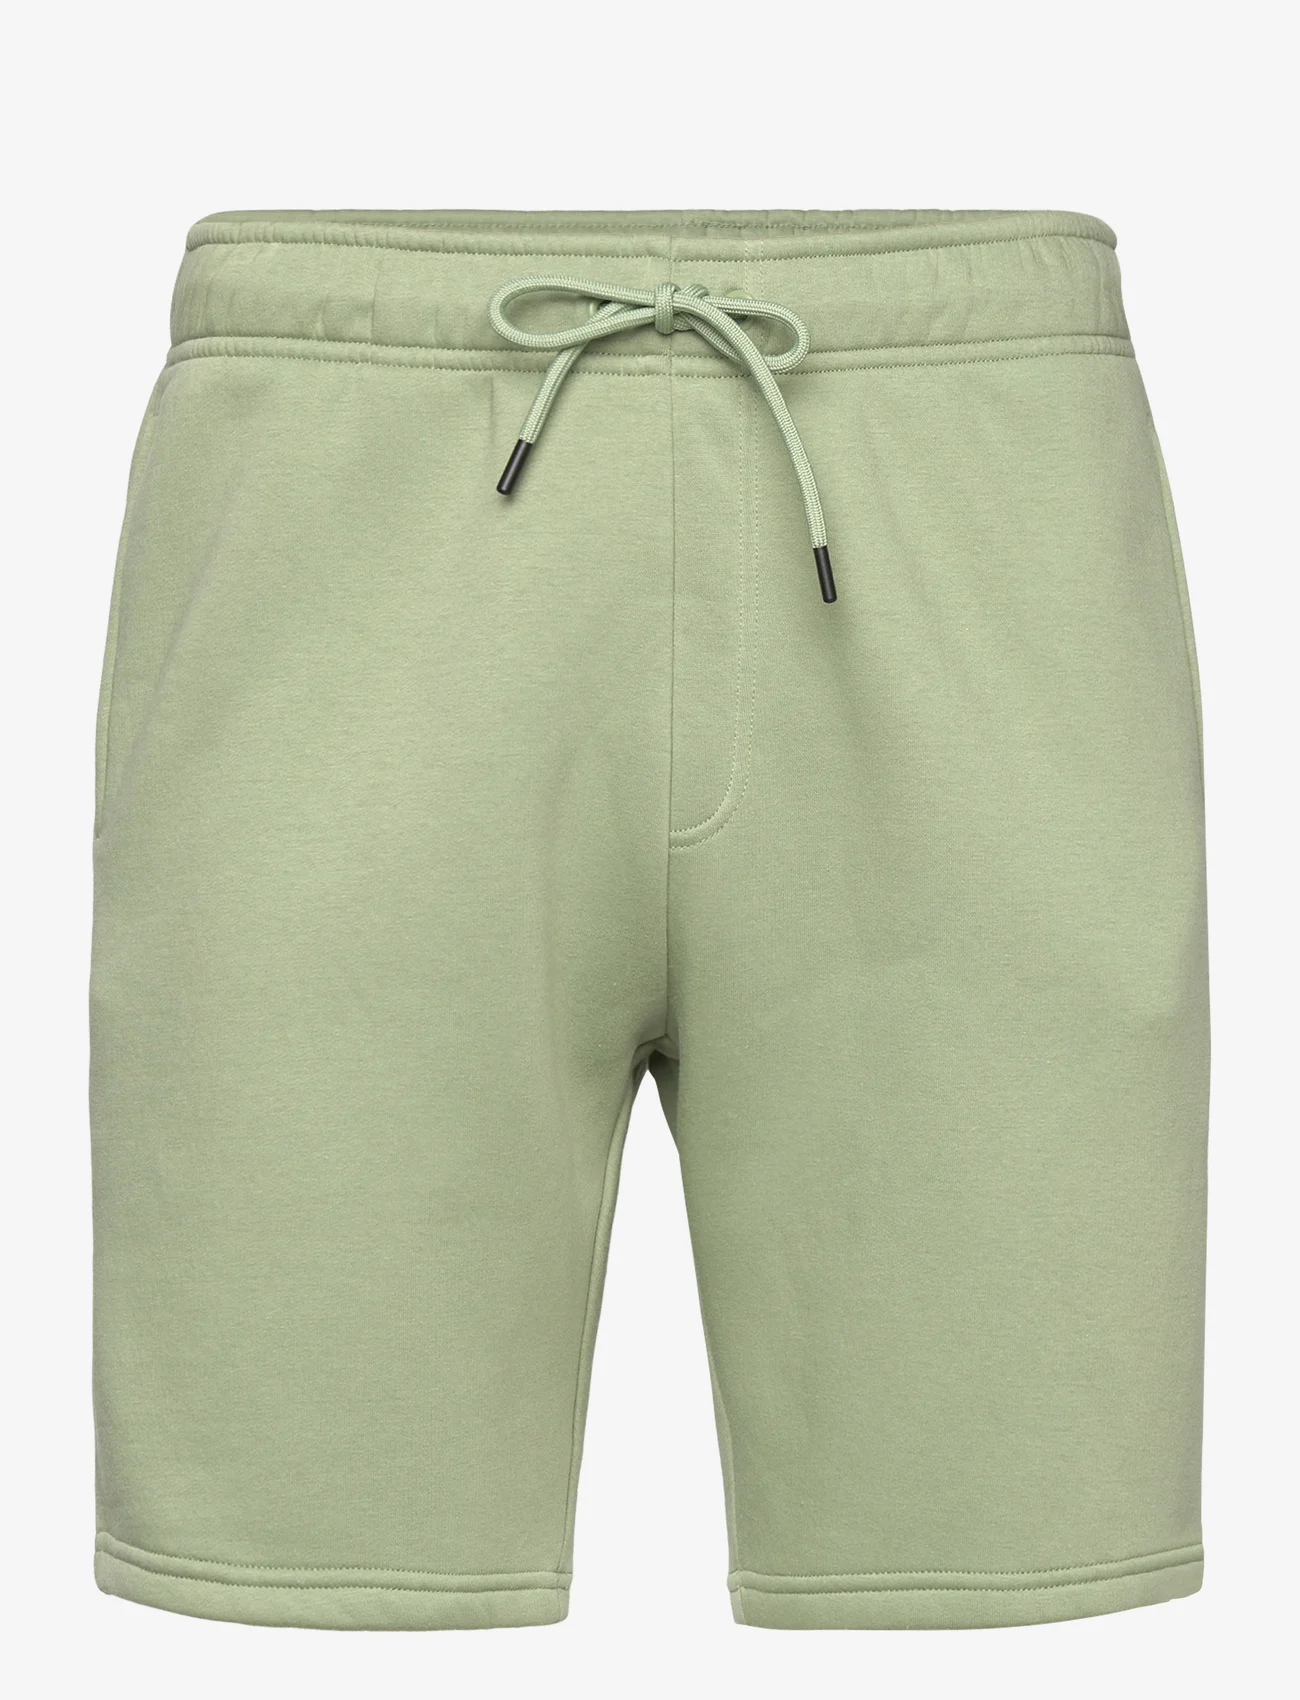 ONLY & SONS - ONSCERES SWEAT SHORTS - mažiausios kainos - hedge green - 0